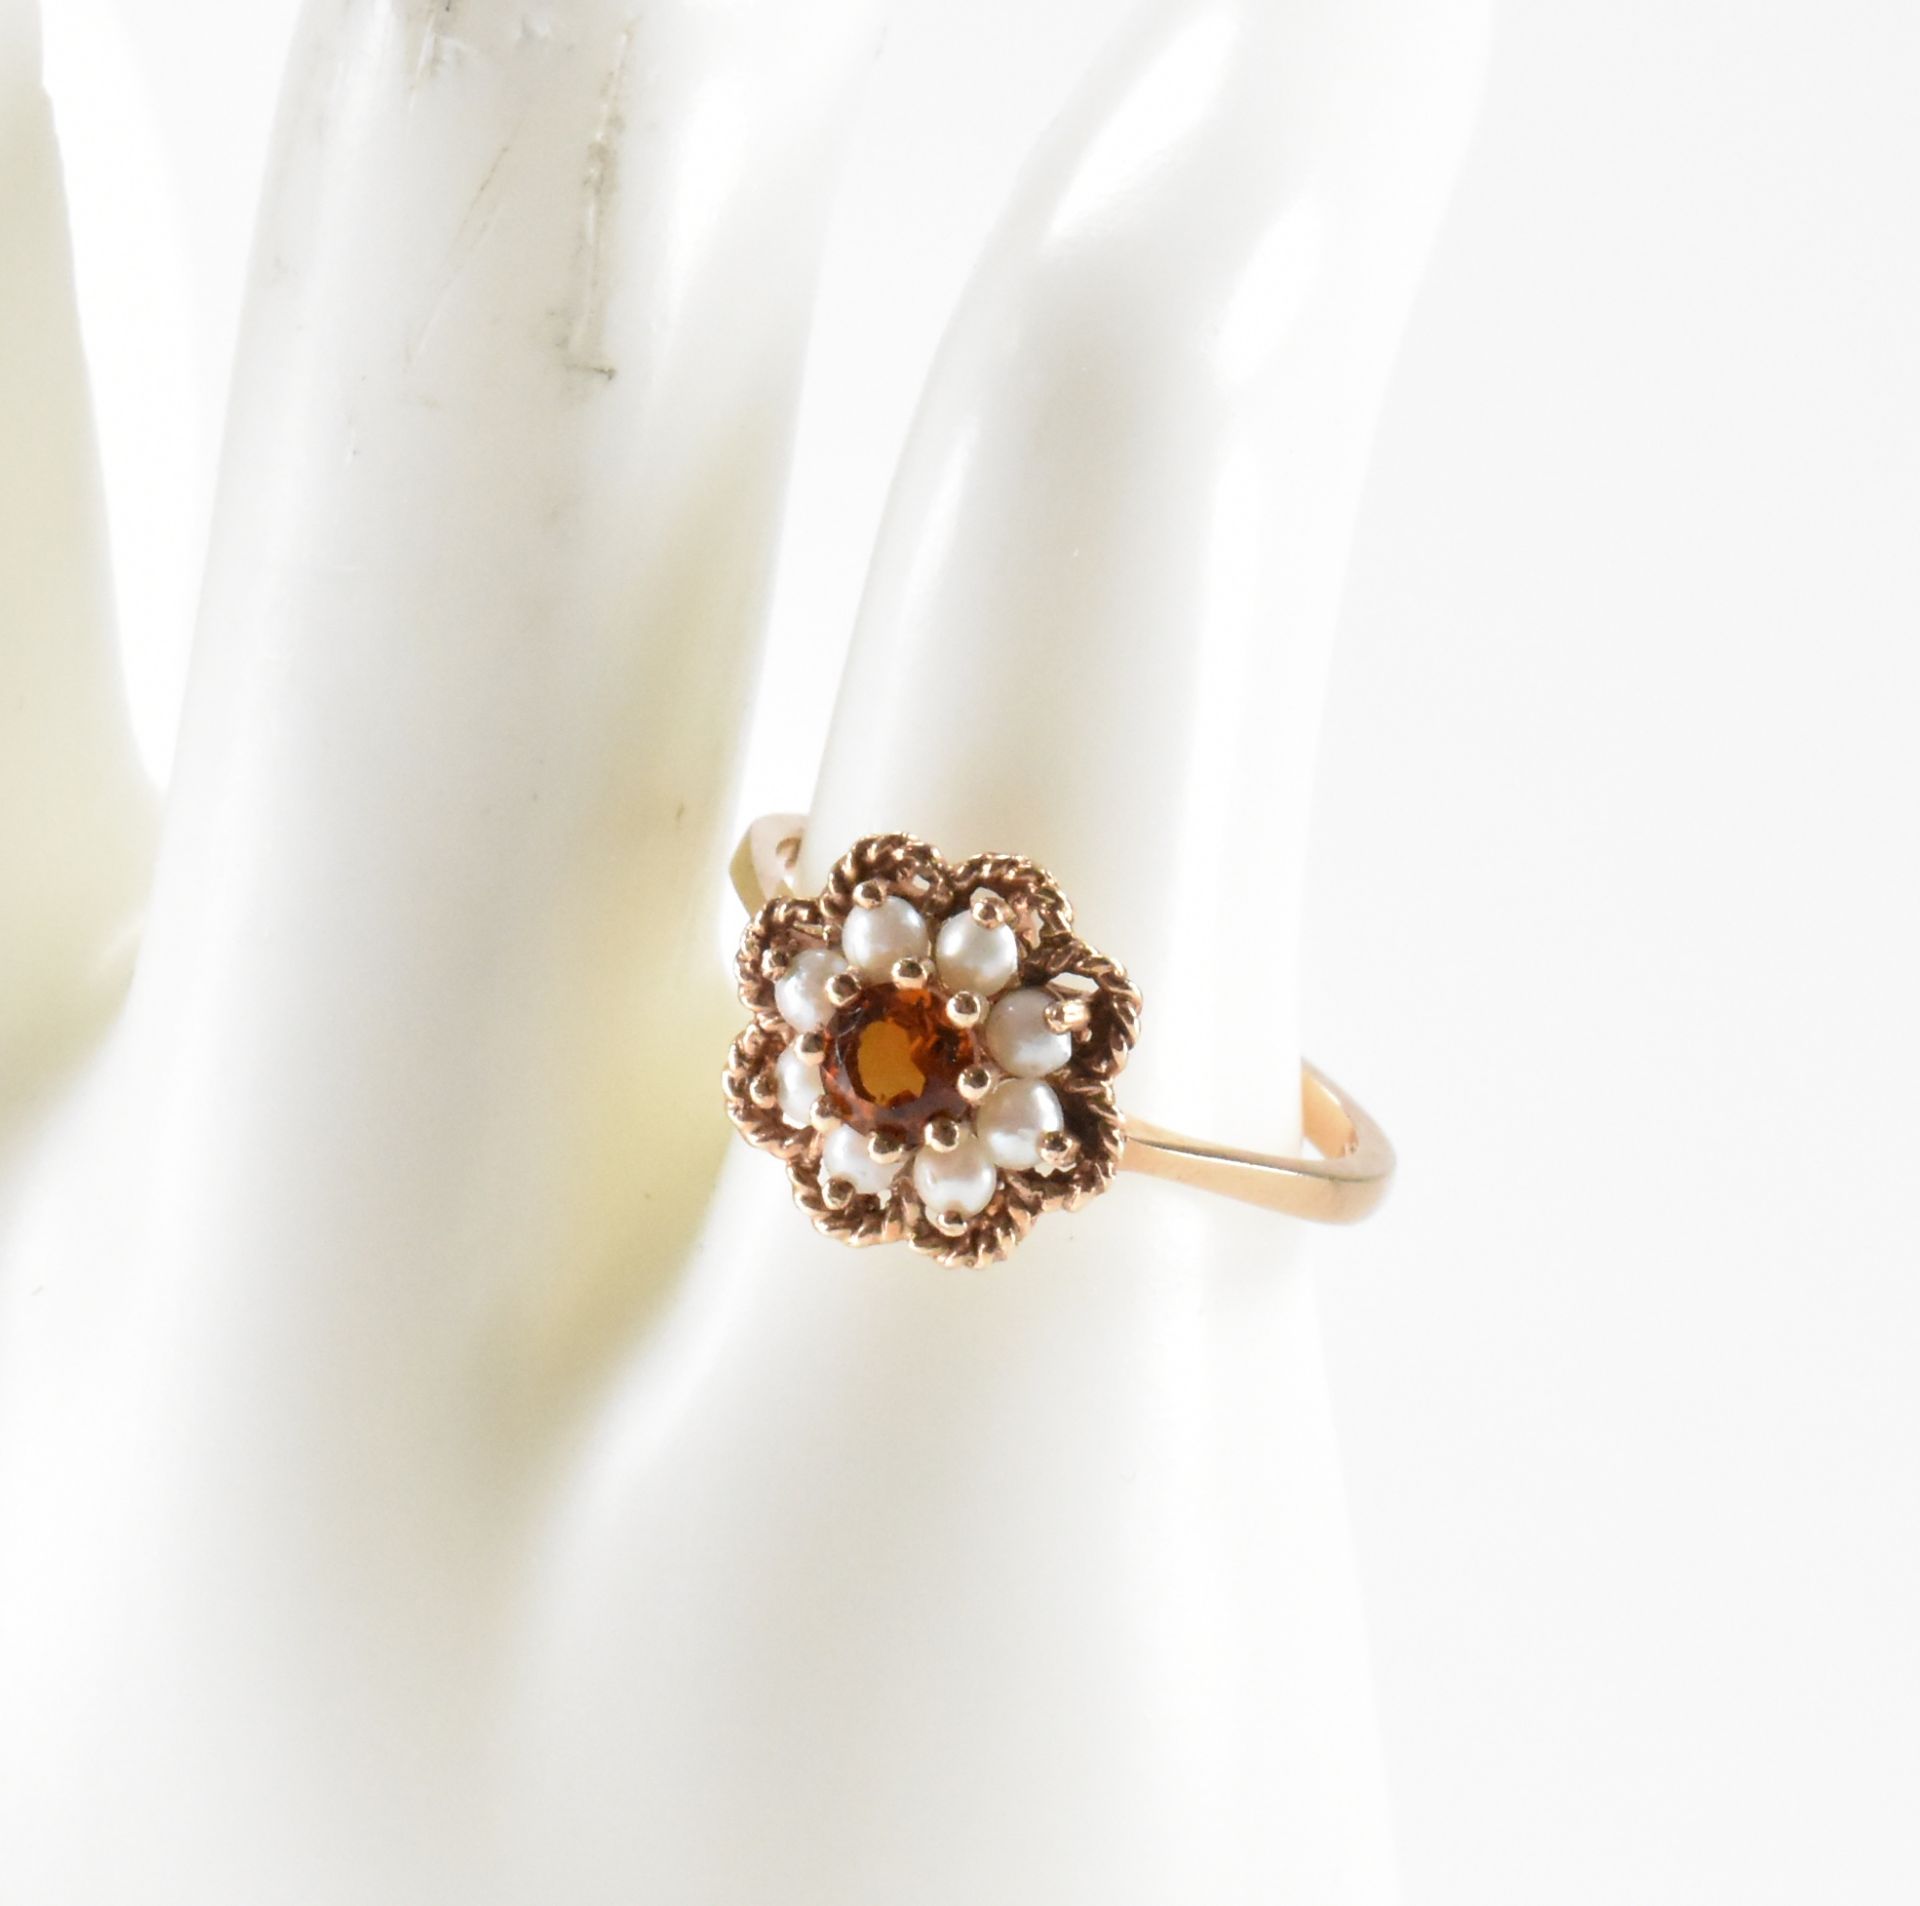 HALLMARKED 9CT GOLD CITRINE & HALF PEARL CLUSTER RING - Image 5 of 5